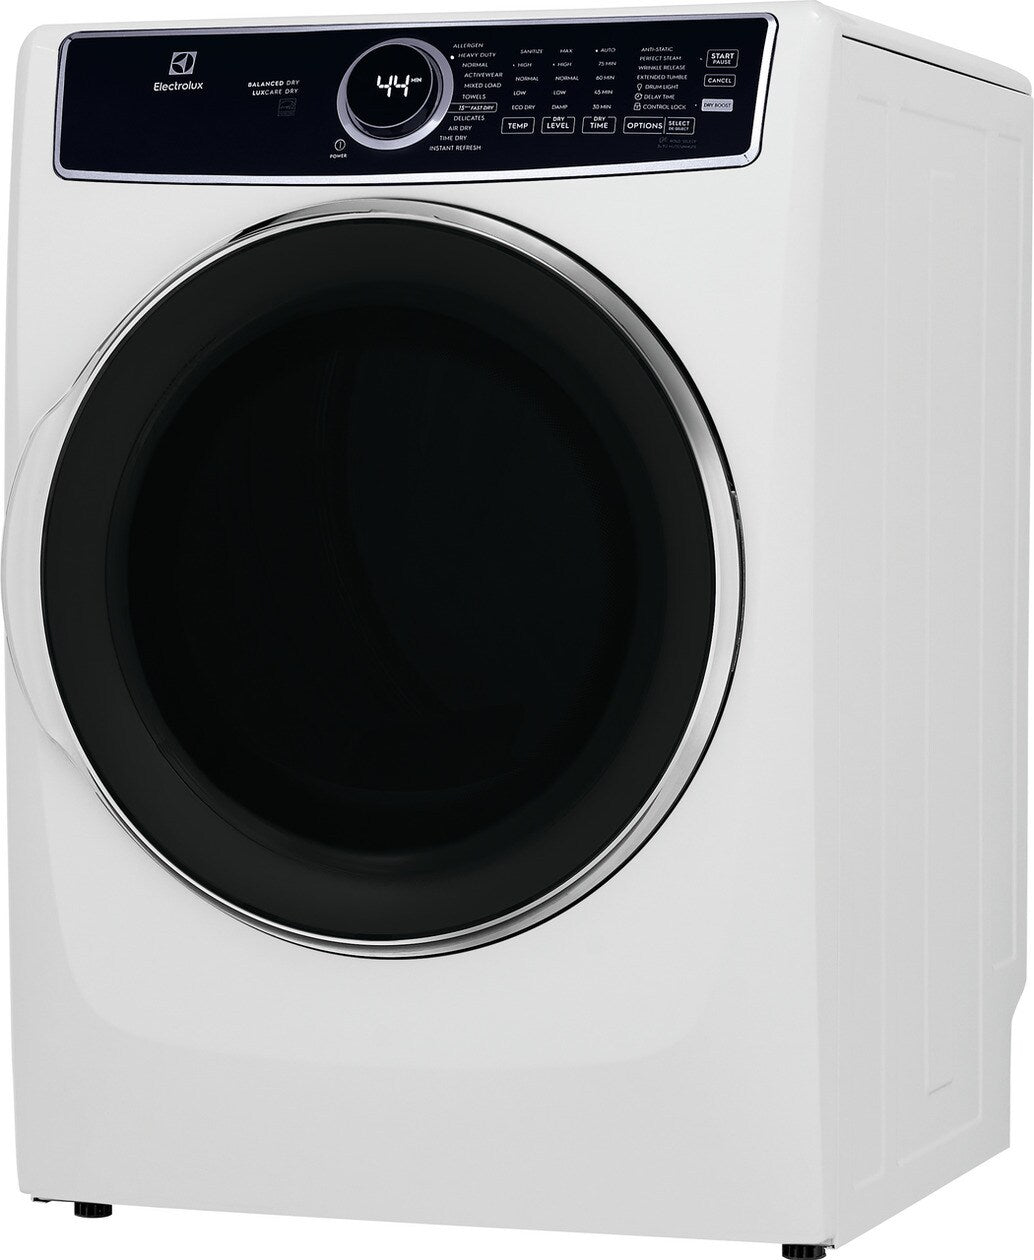 Electrolux - 8 cu. Ft  Electric Dryer in White - ELFE763CAW